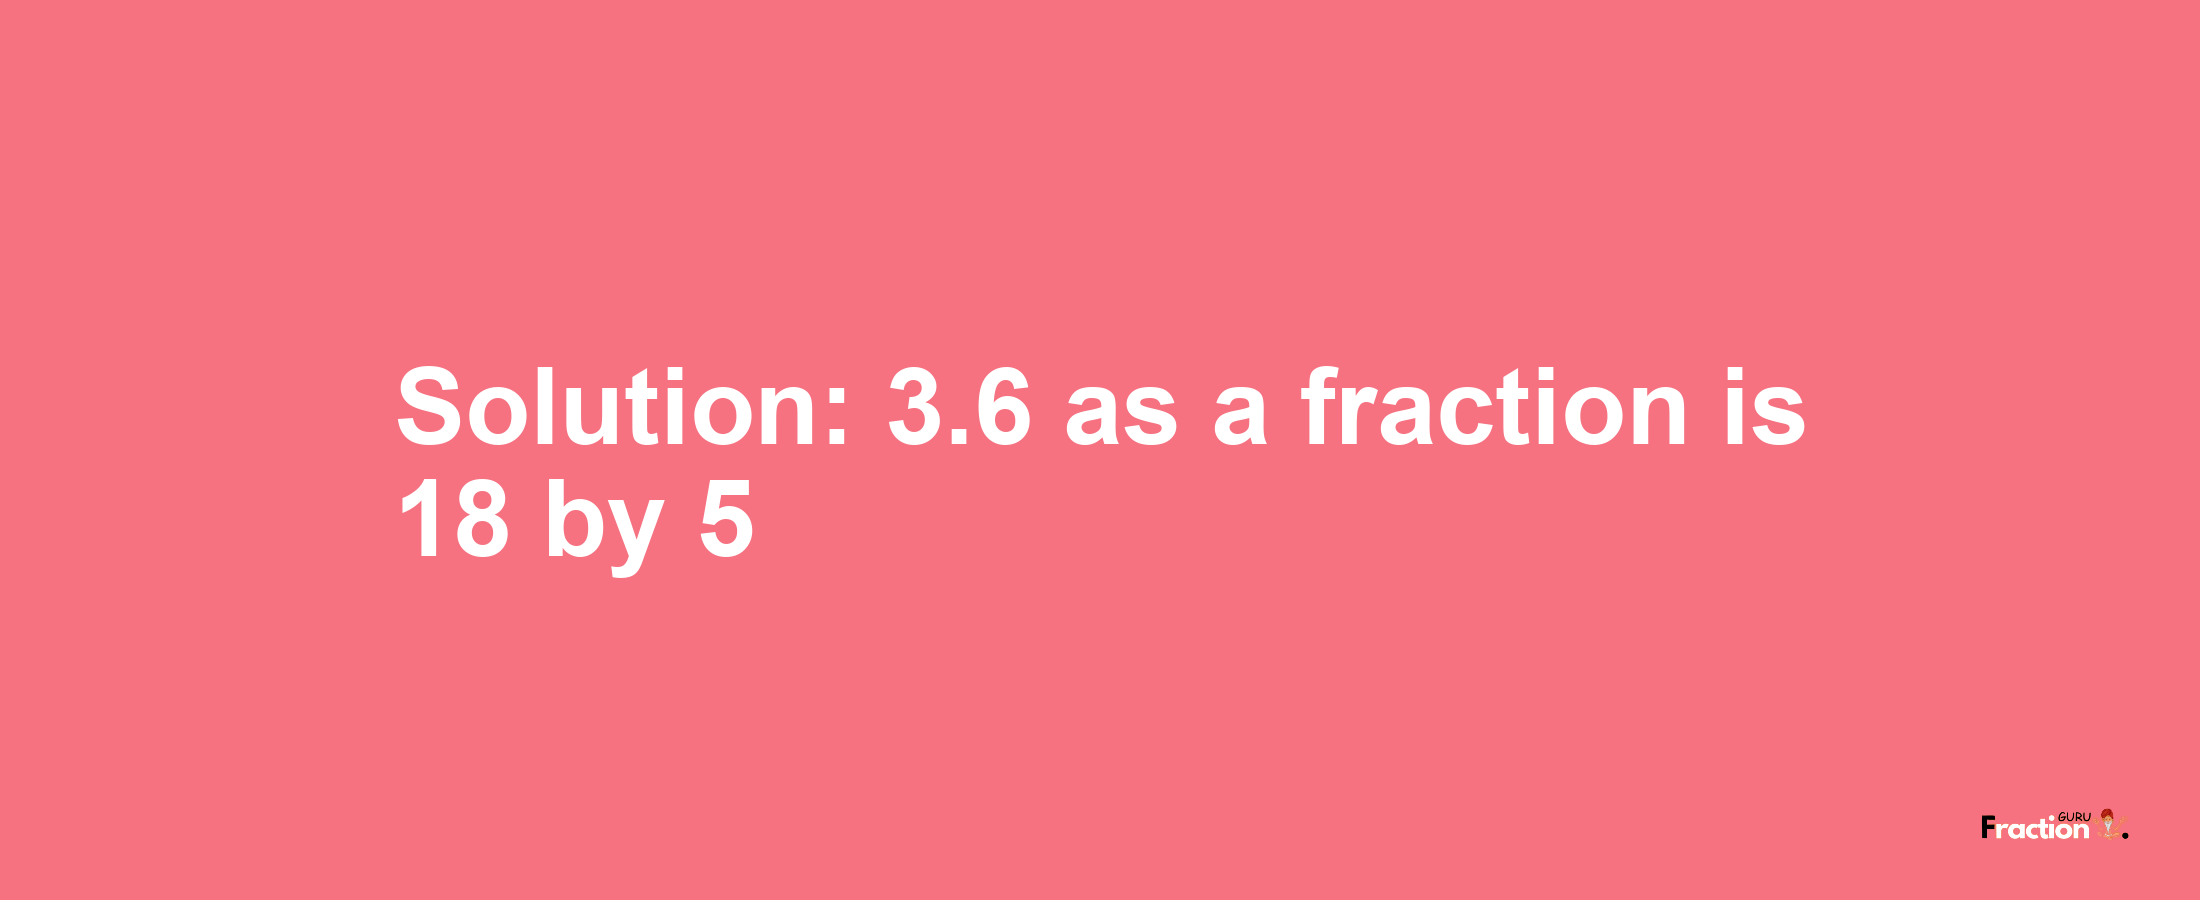 Solution:3.6 as a fraction is 18/5